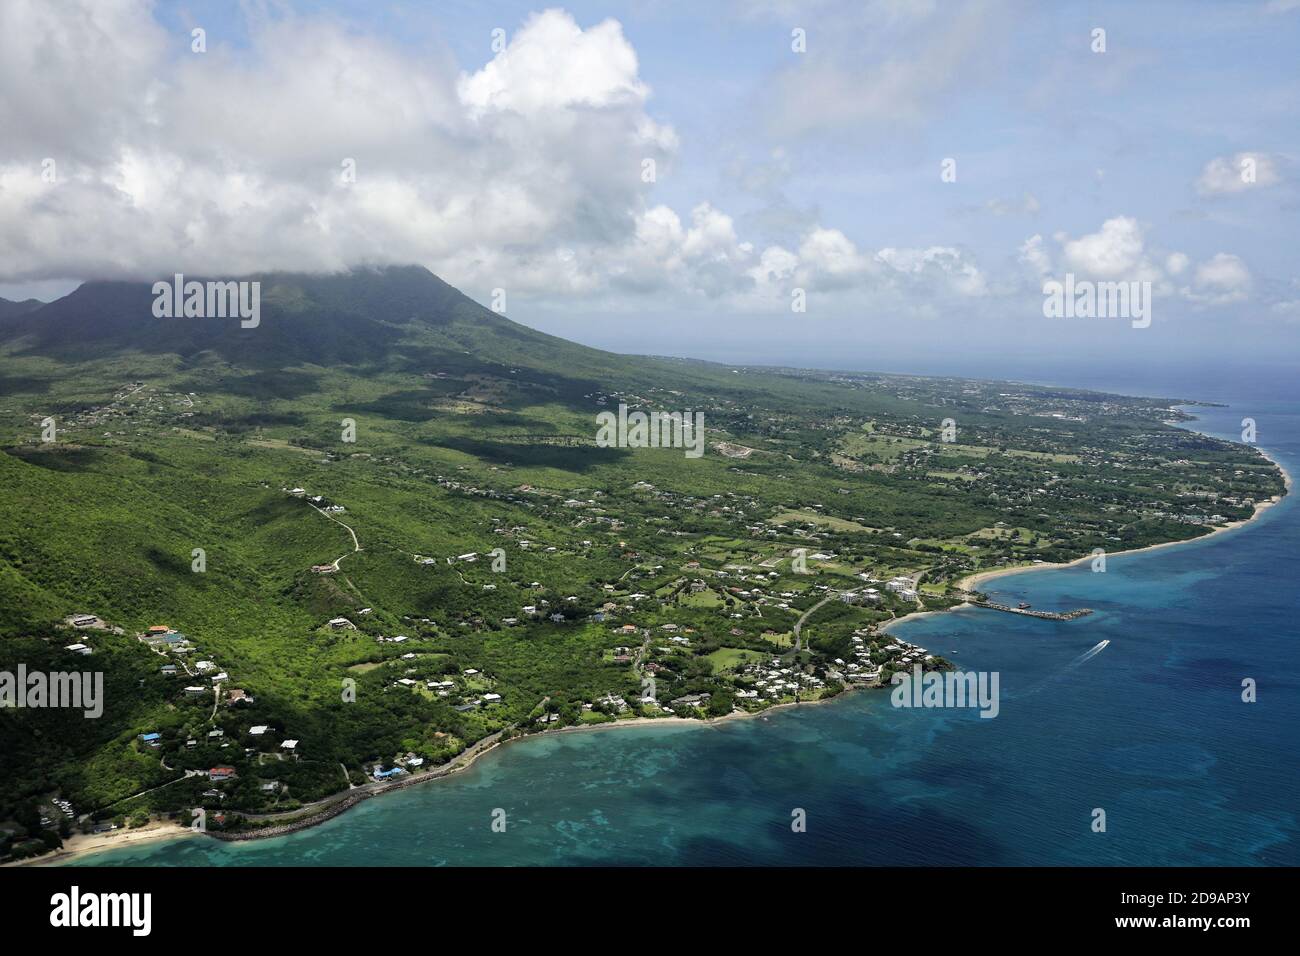 The Caribbean, St. Kitts and Nevis: aerial view of Jones Bay, north of Nevis Island. Stock Photo